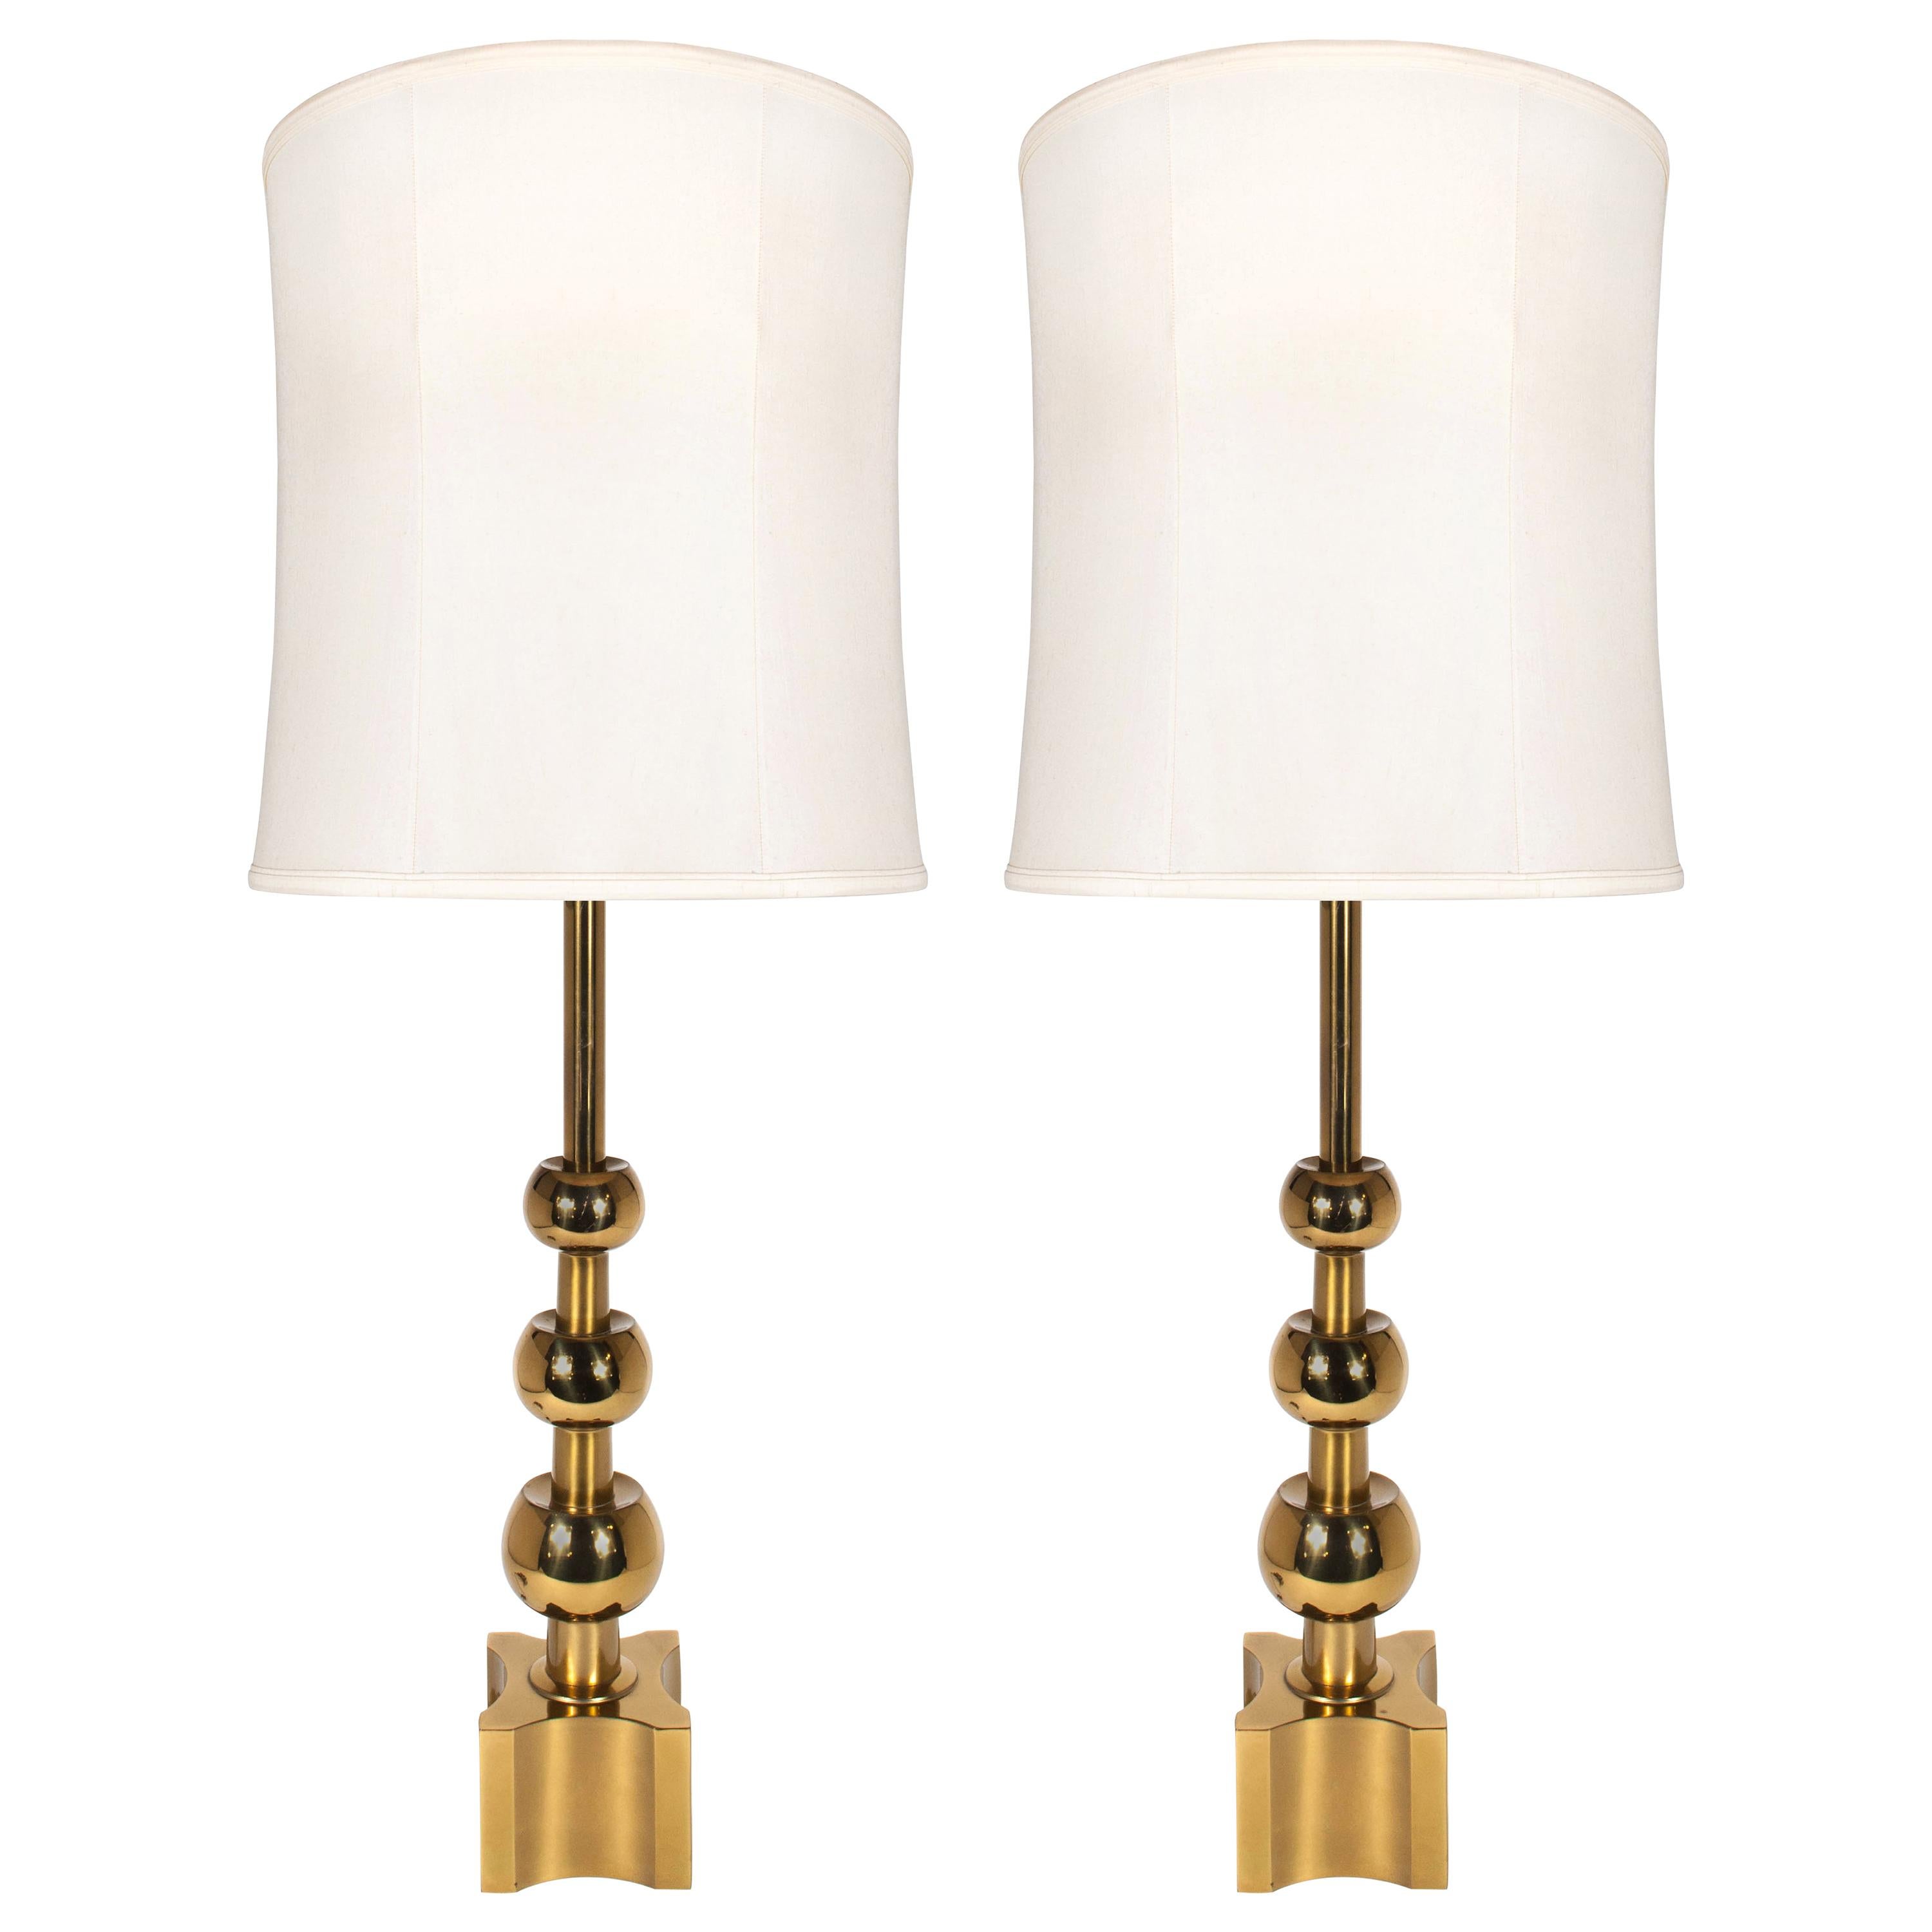 1960s Tommi Parzinger for Stiffel Brass Ball Lamps, a Pair For Sale